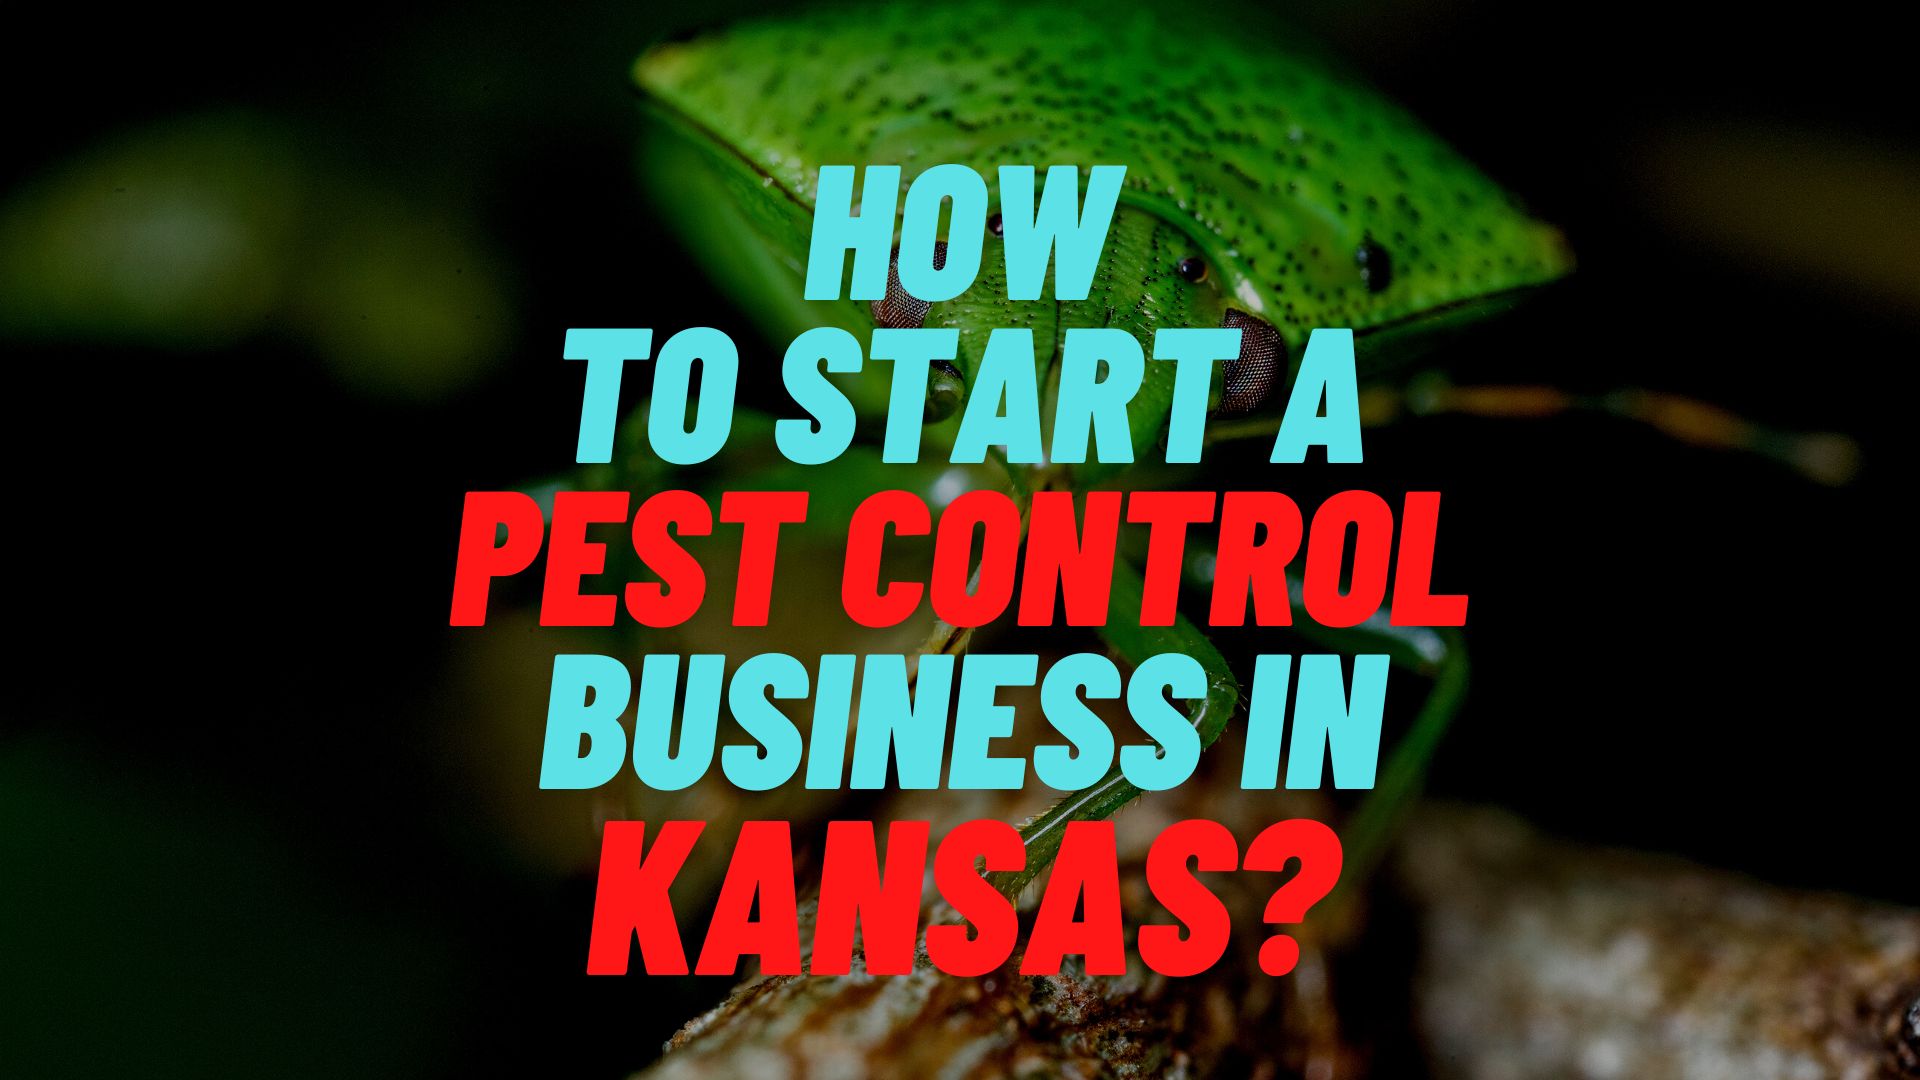 How to start a pest control business in Kansas?